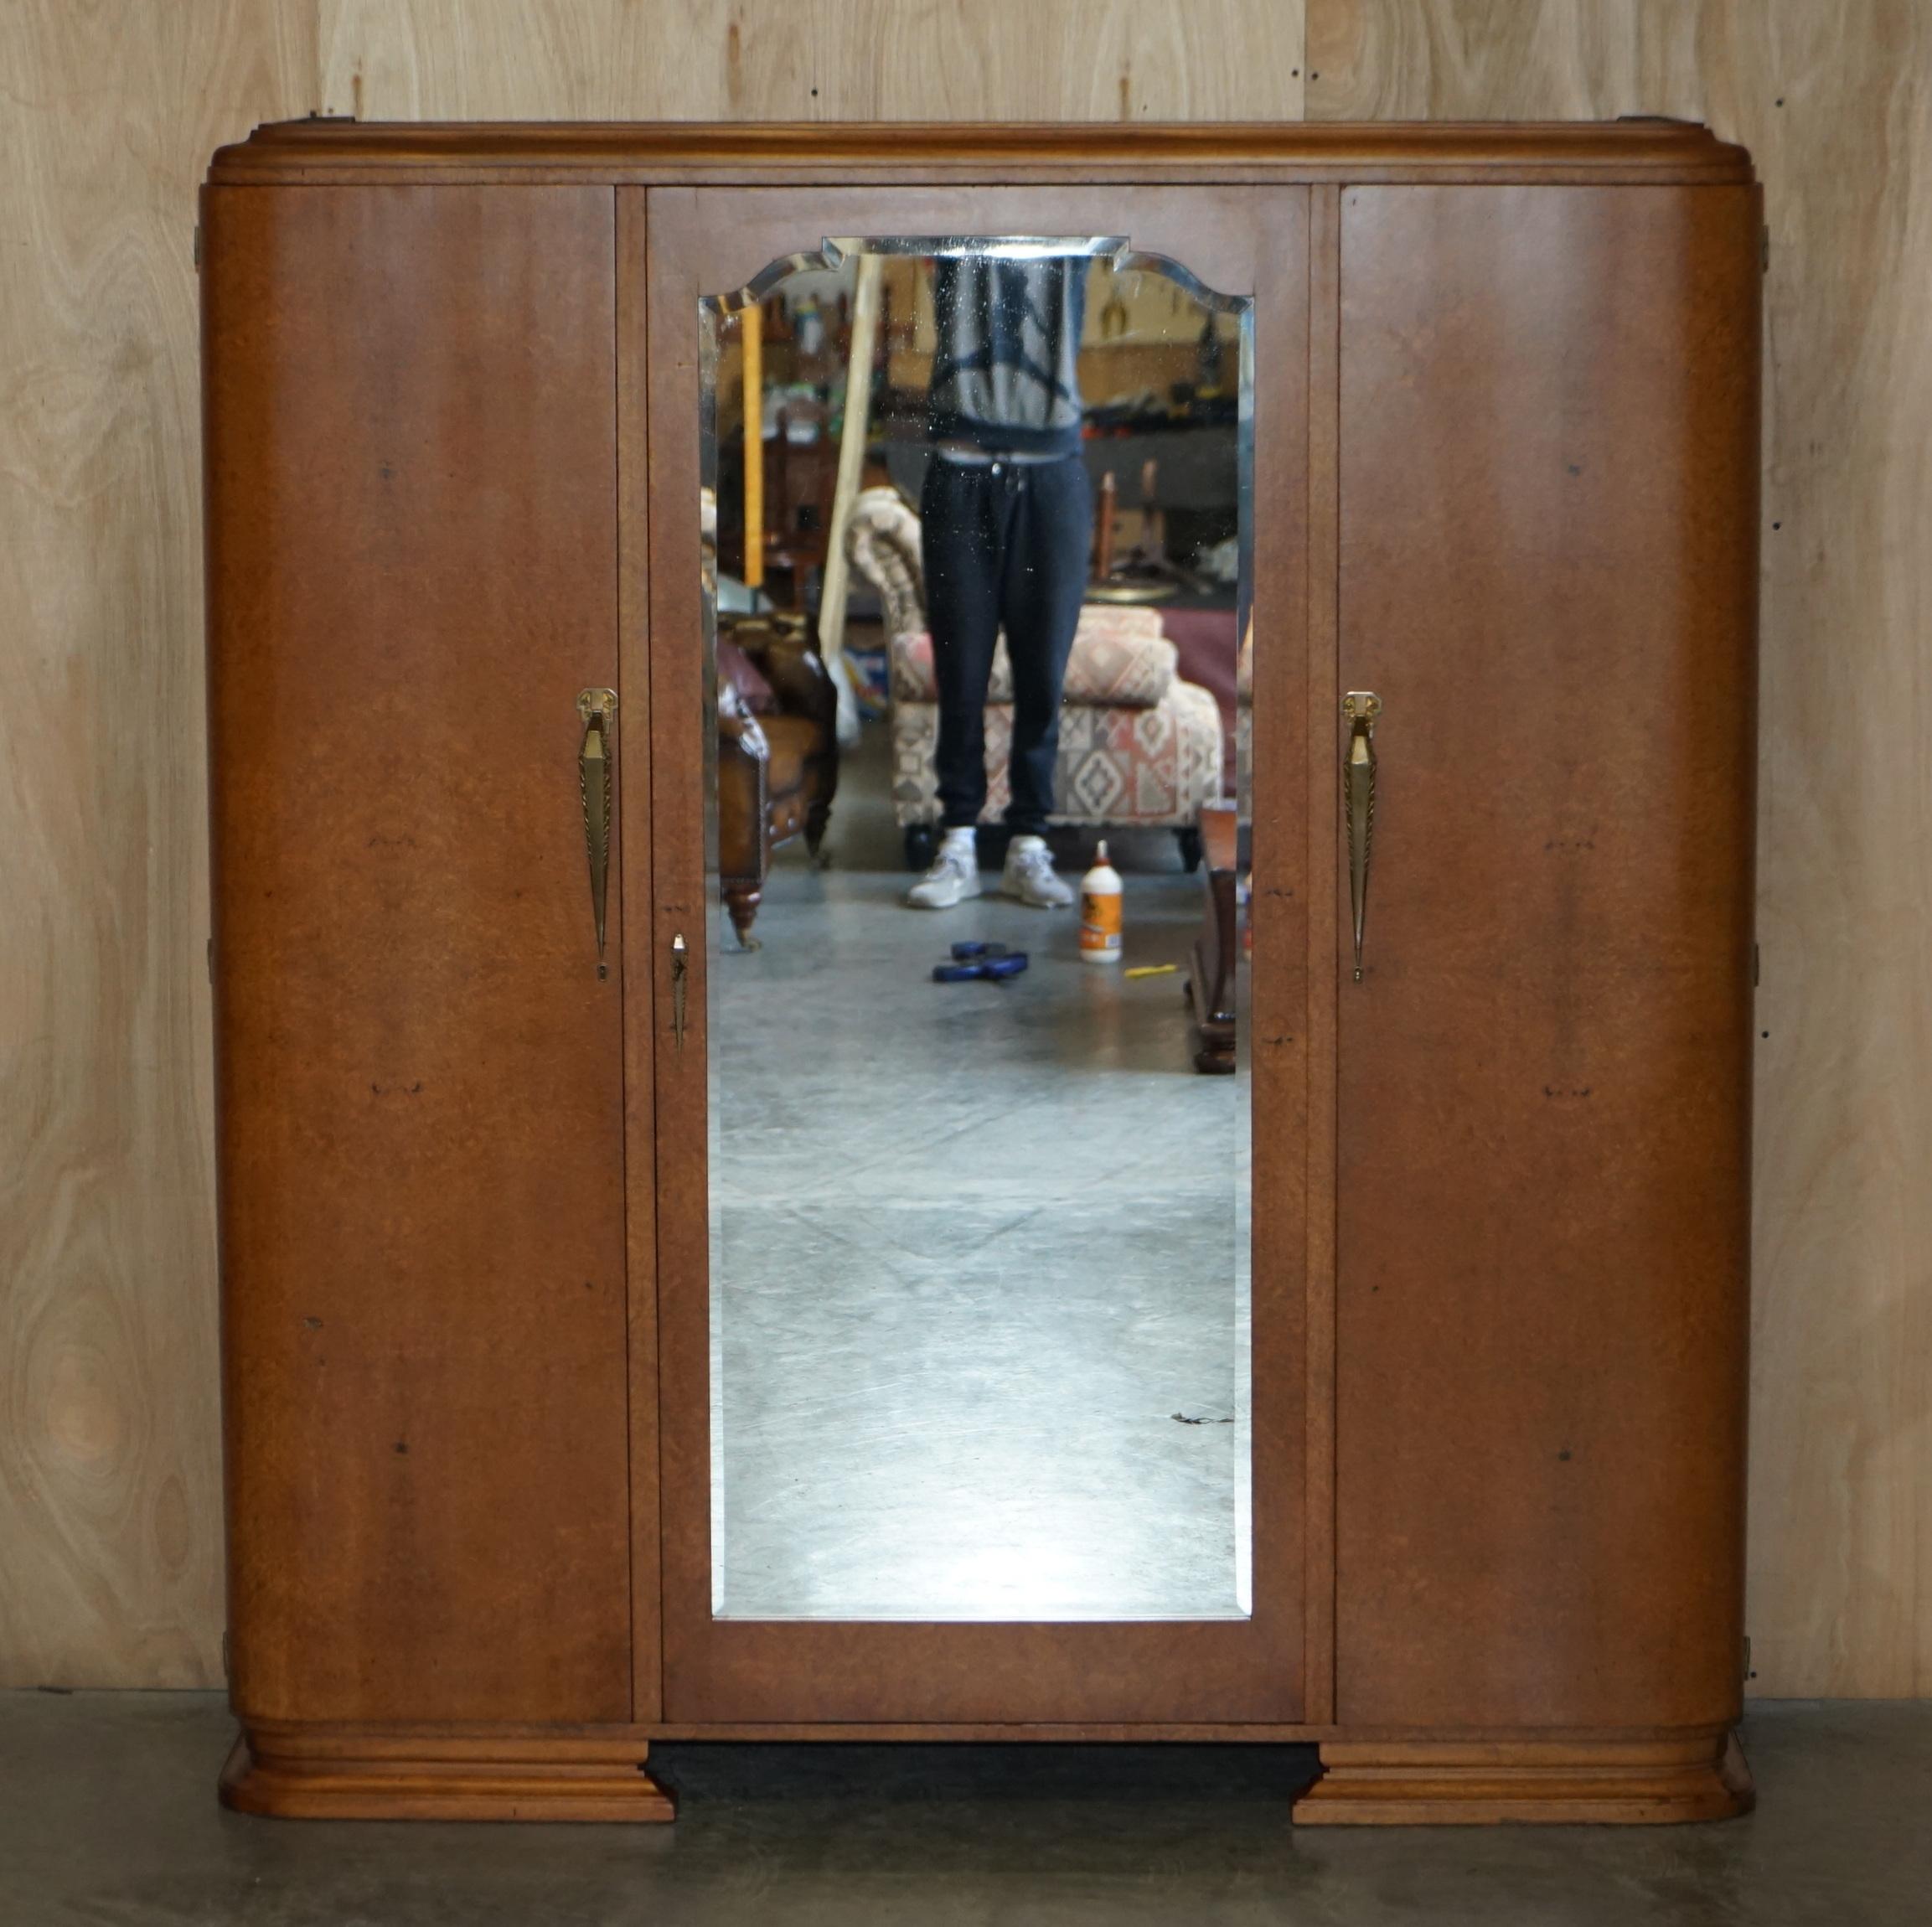 We are delighted to offer for sale this stunning Art Deco Burr Maple triple bank wardrobe with large full length mirrored middle door which is part of a small suite

This is a very good looking well made and decorative piece, the timber grain,